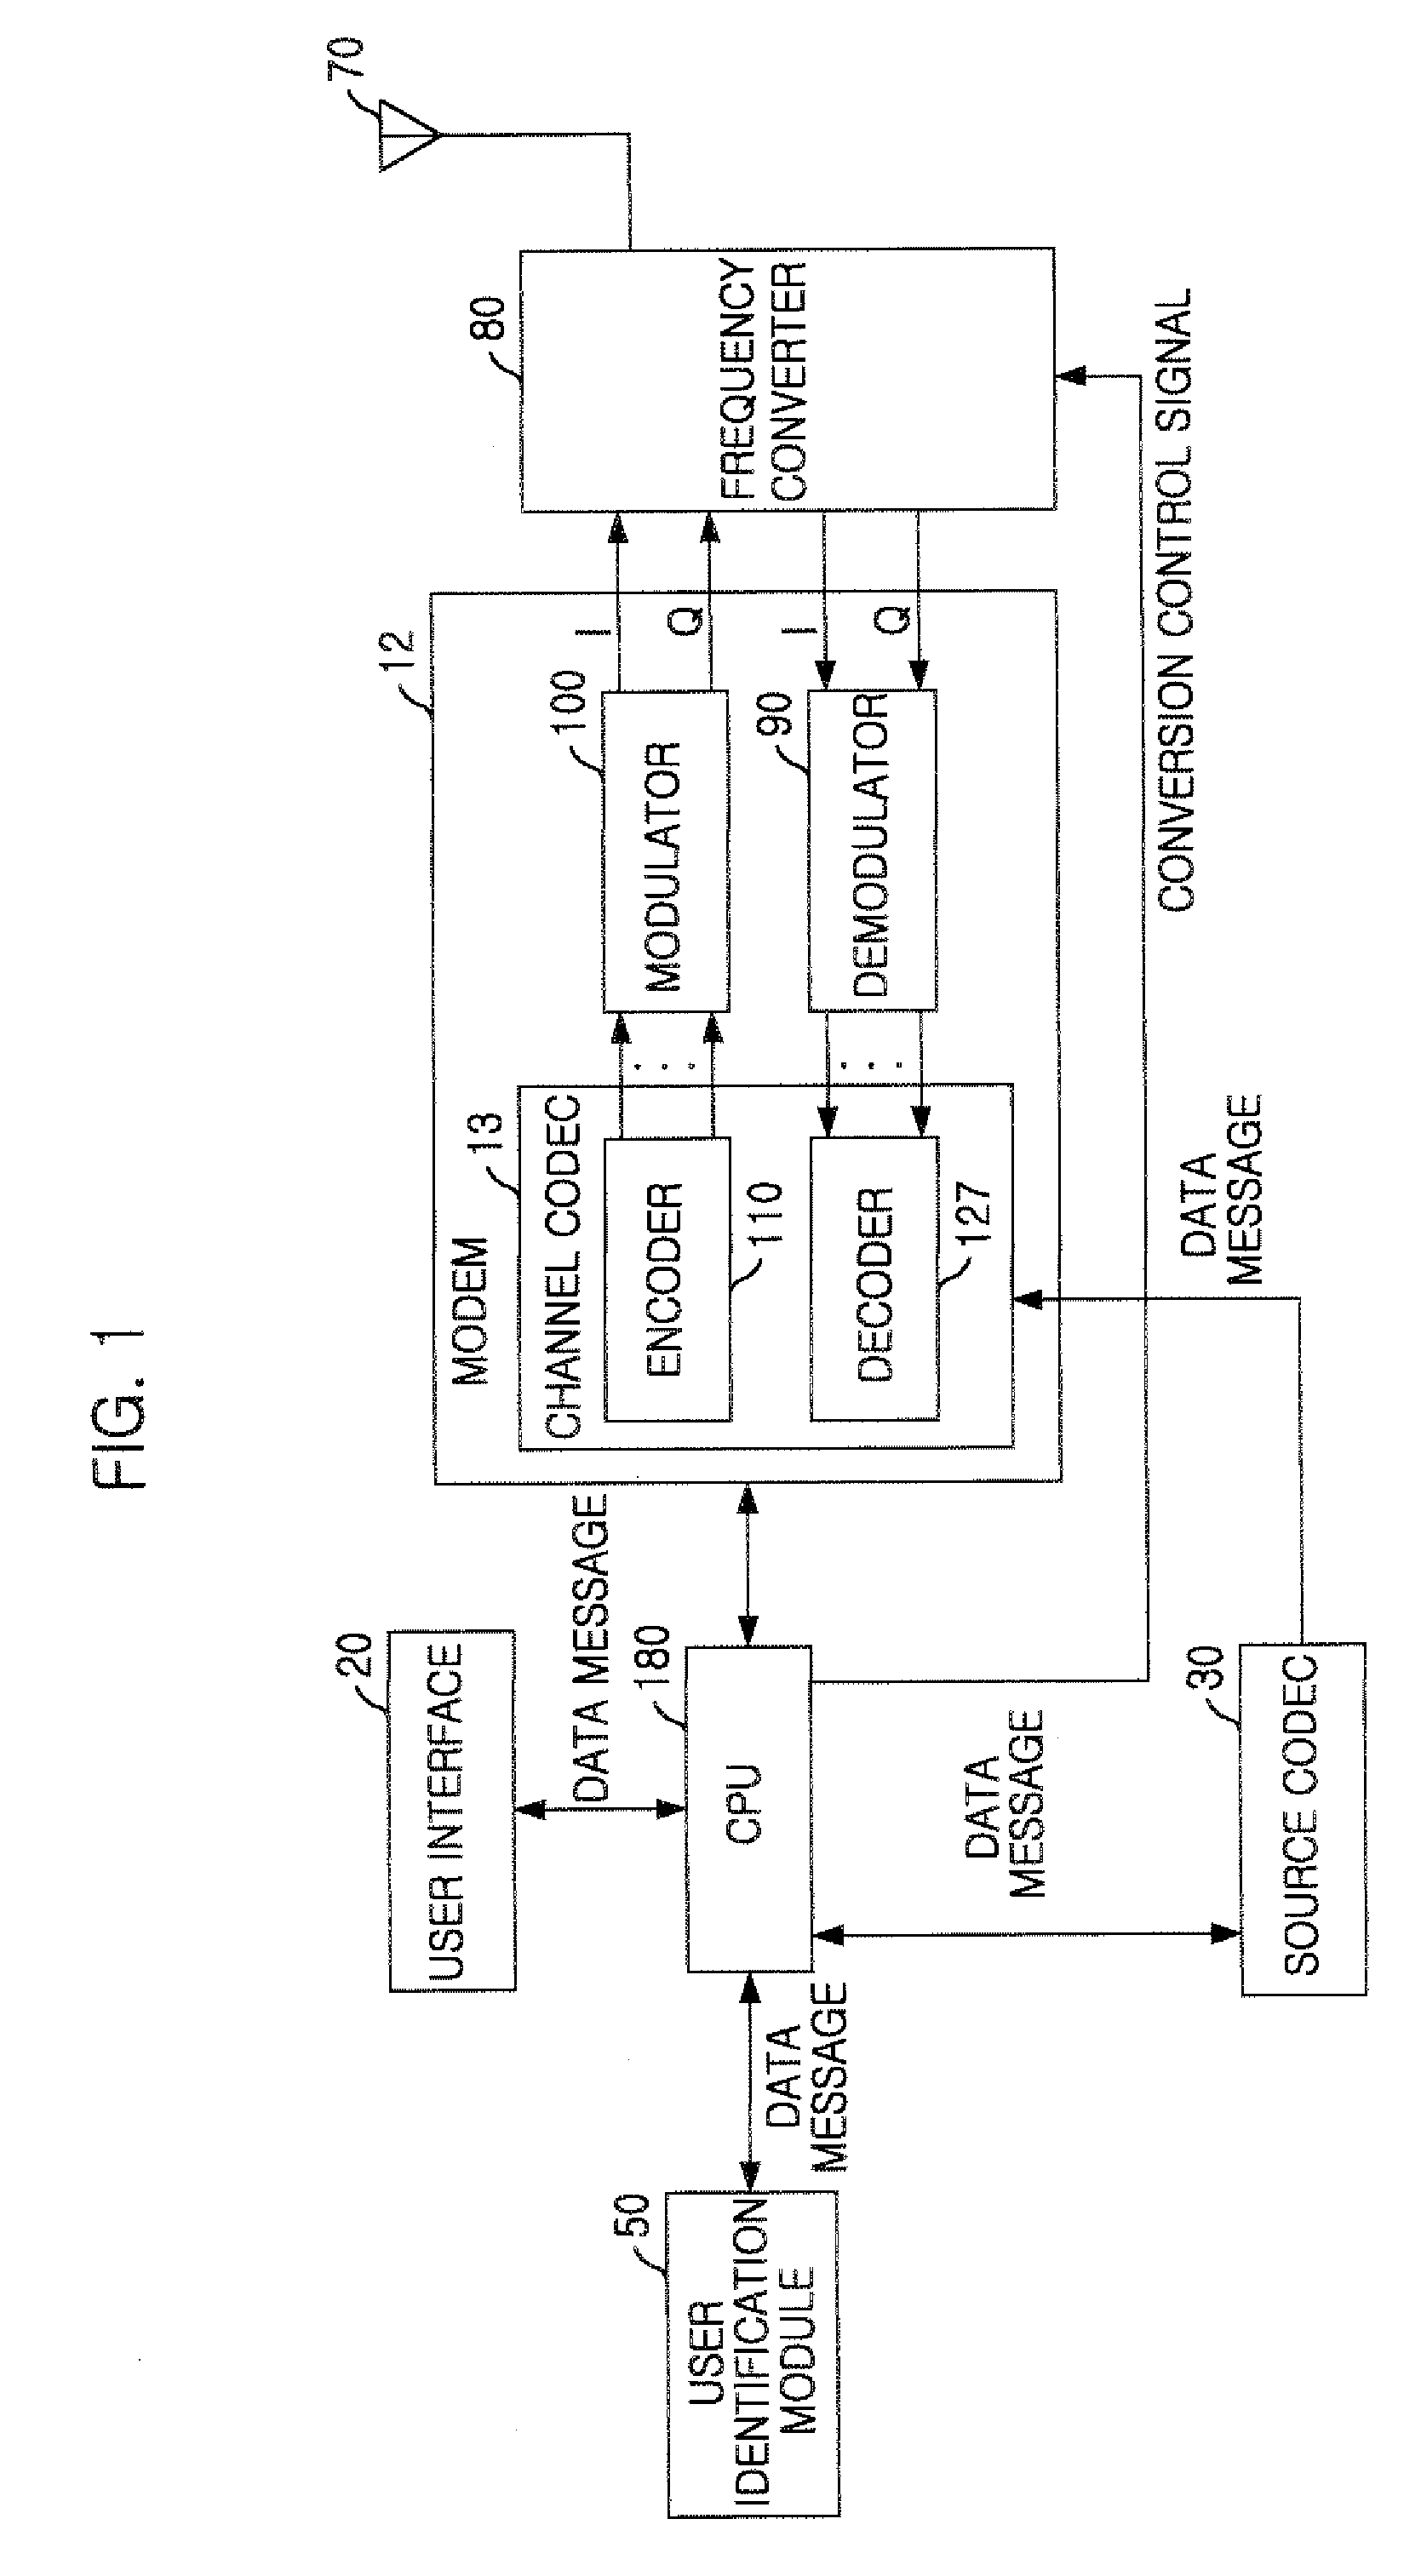 Apparatus and method for modulating data message by employing orthogonal variable spreading factor (OVSF) codes in mobile communication system